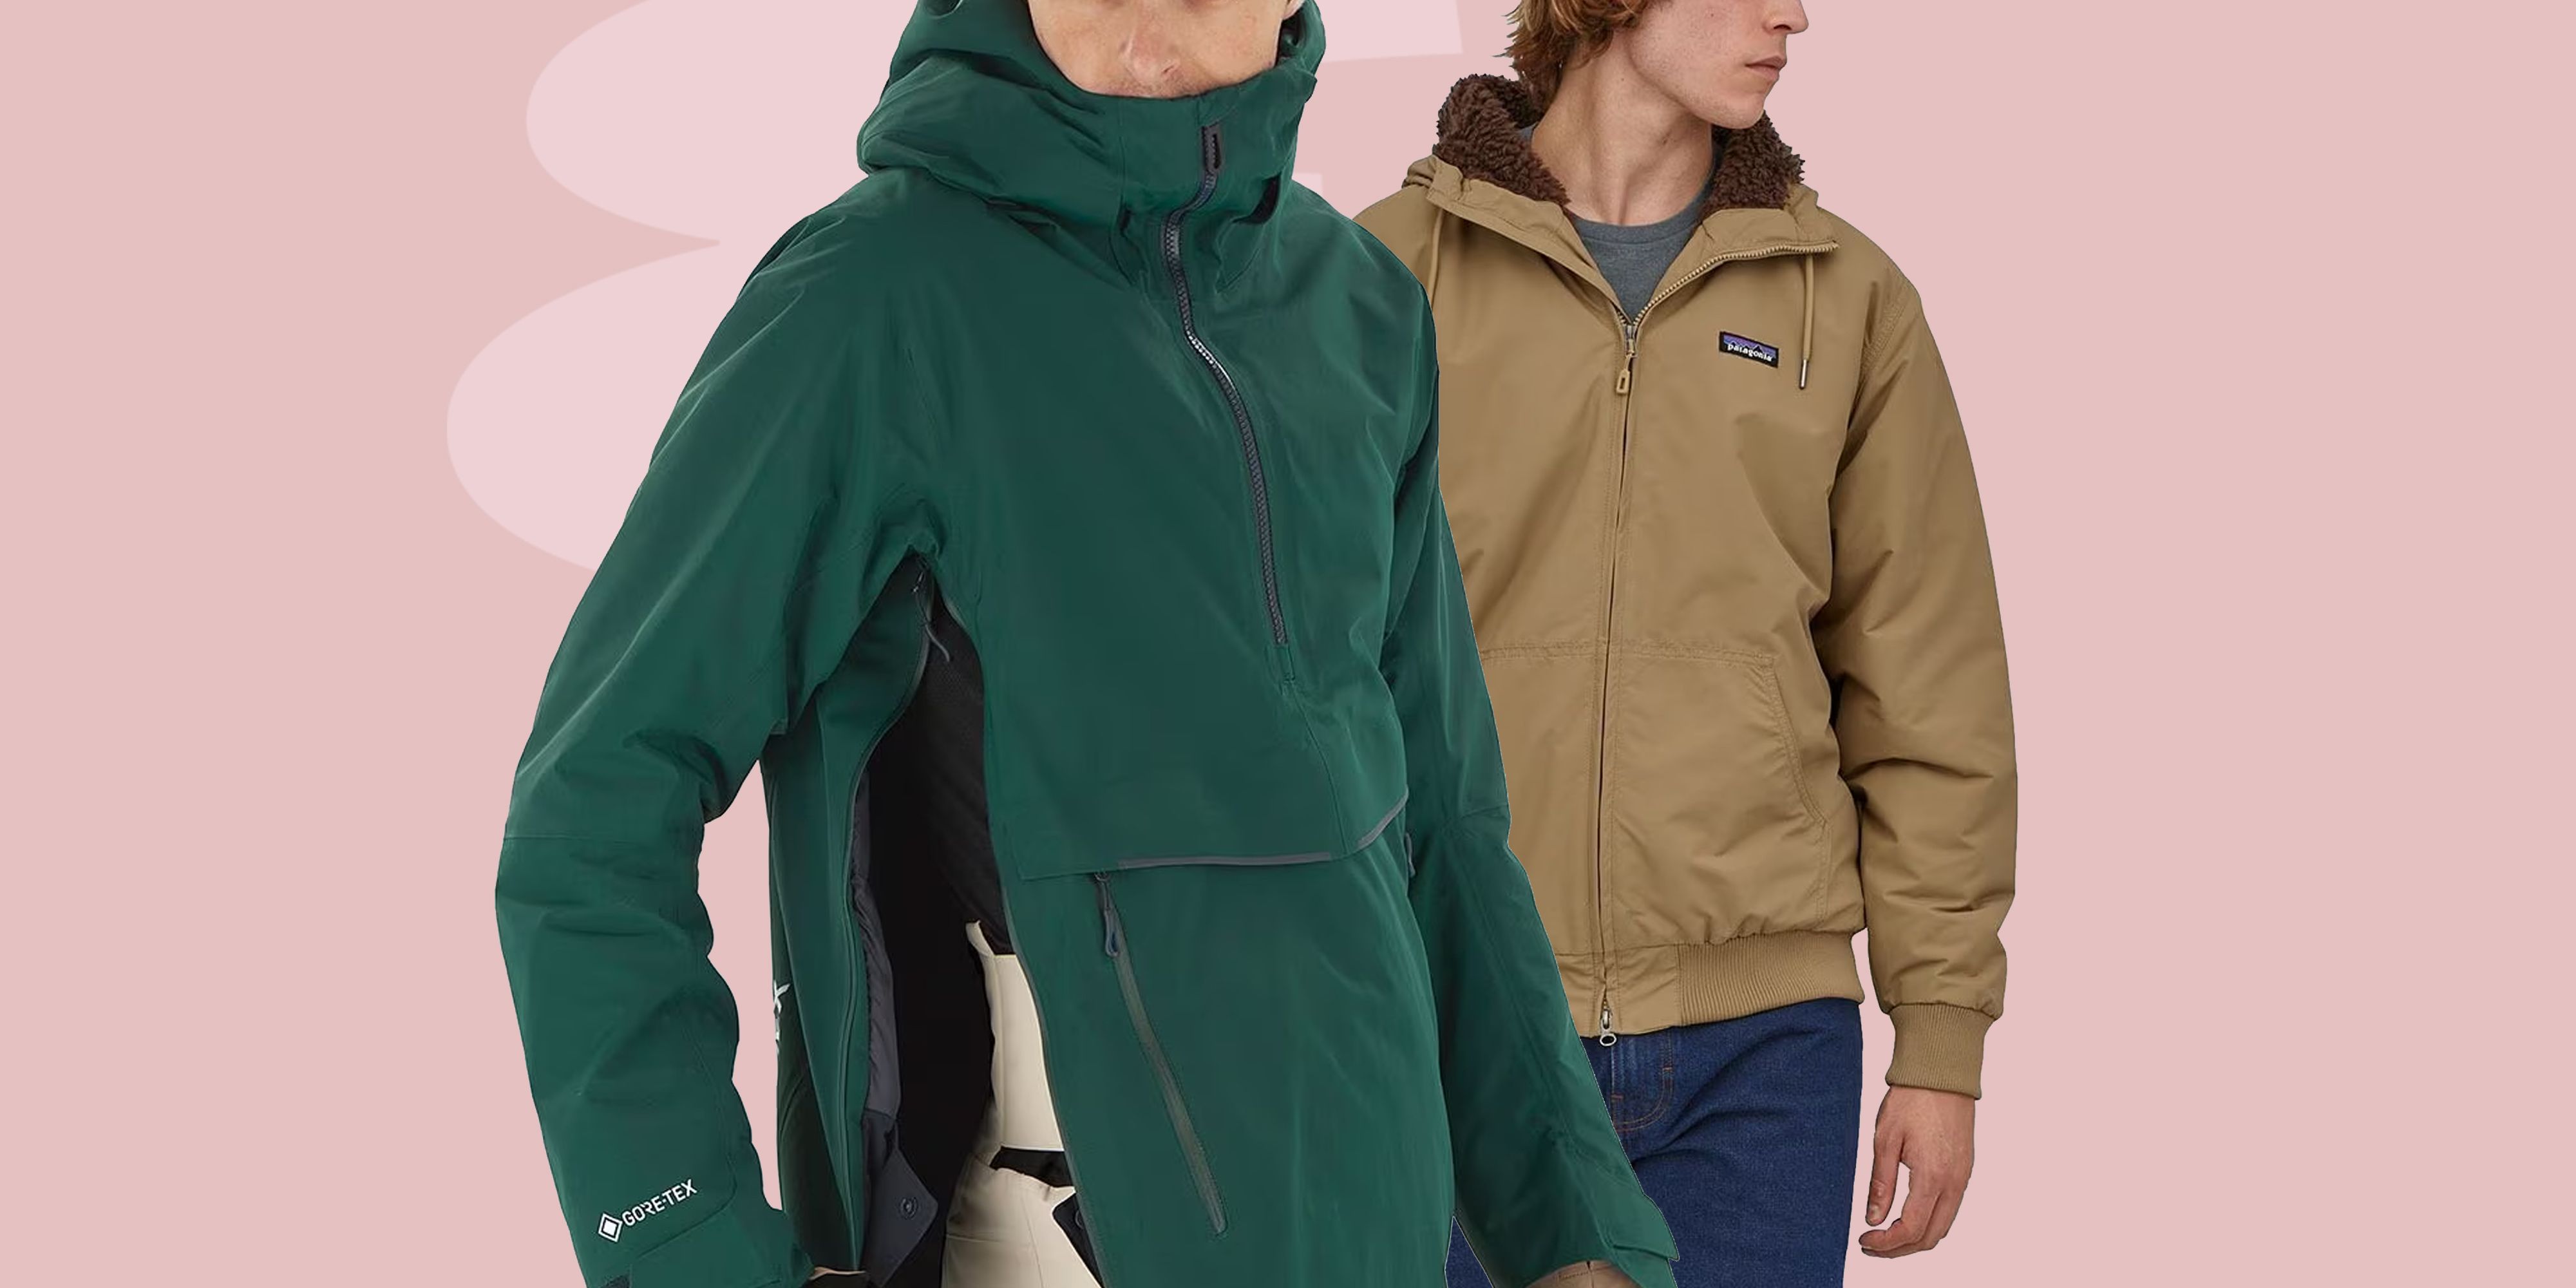 Patagonia sale at Backcountry - petite friendly jacket style try ons